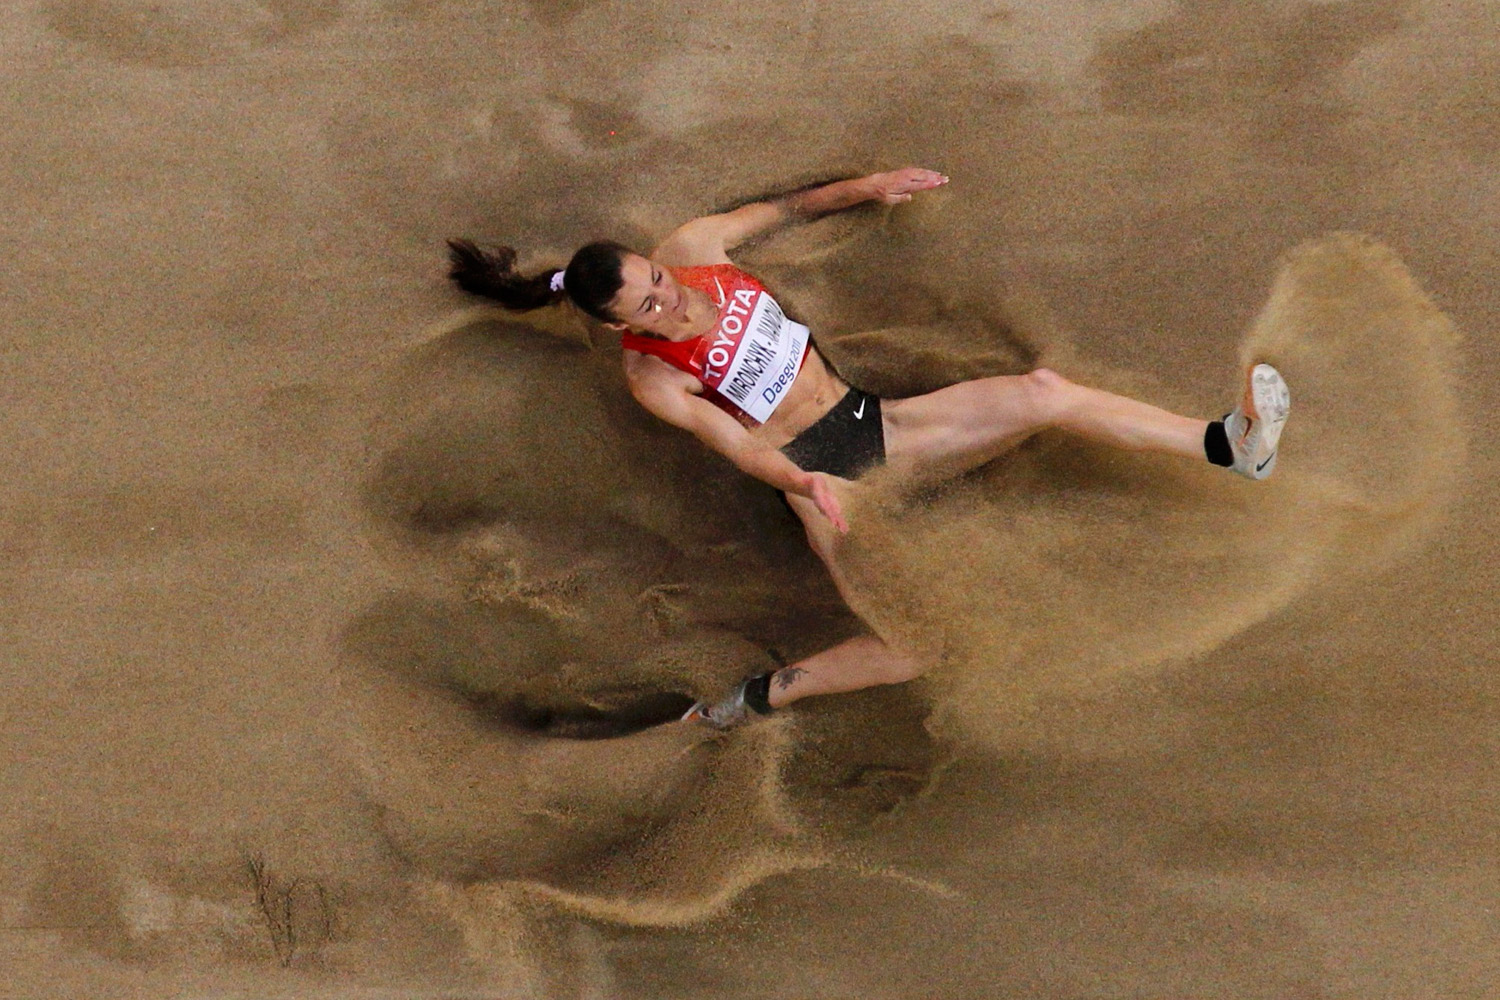 Nastassia Mironchyk-Ivanova of Belarus competes during the women's long jump final at the IAAF World Championships in Daegu, South Korea, August 28, 2011.